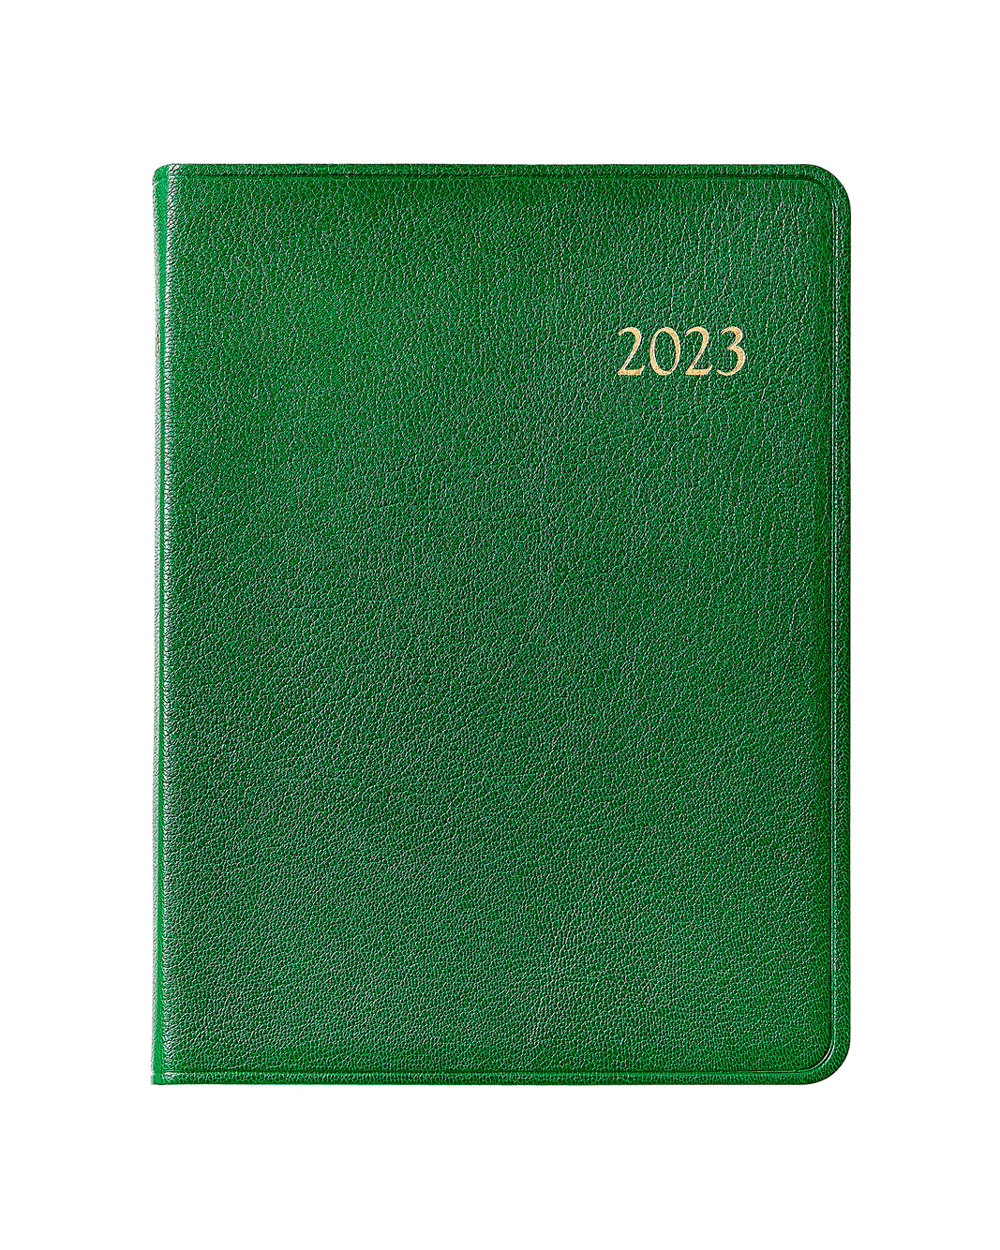 2023 Green Leather Planner